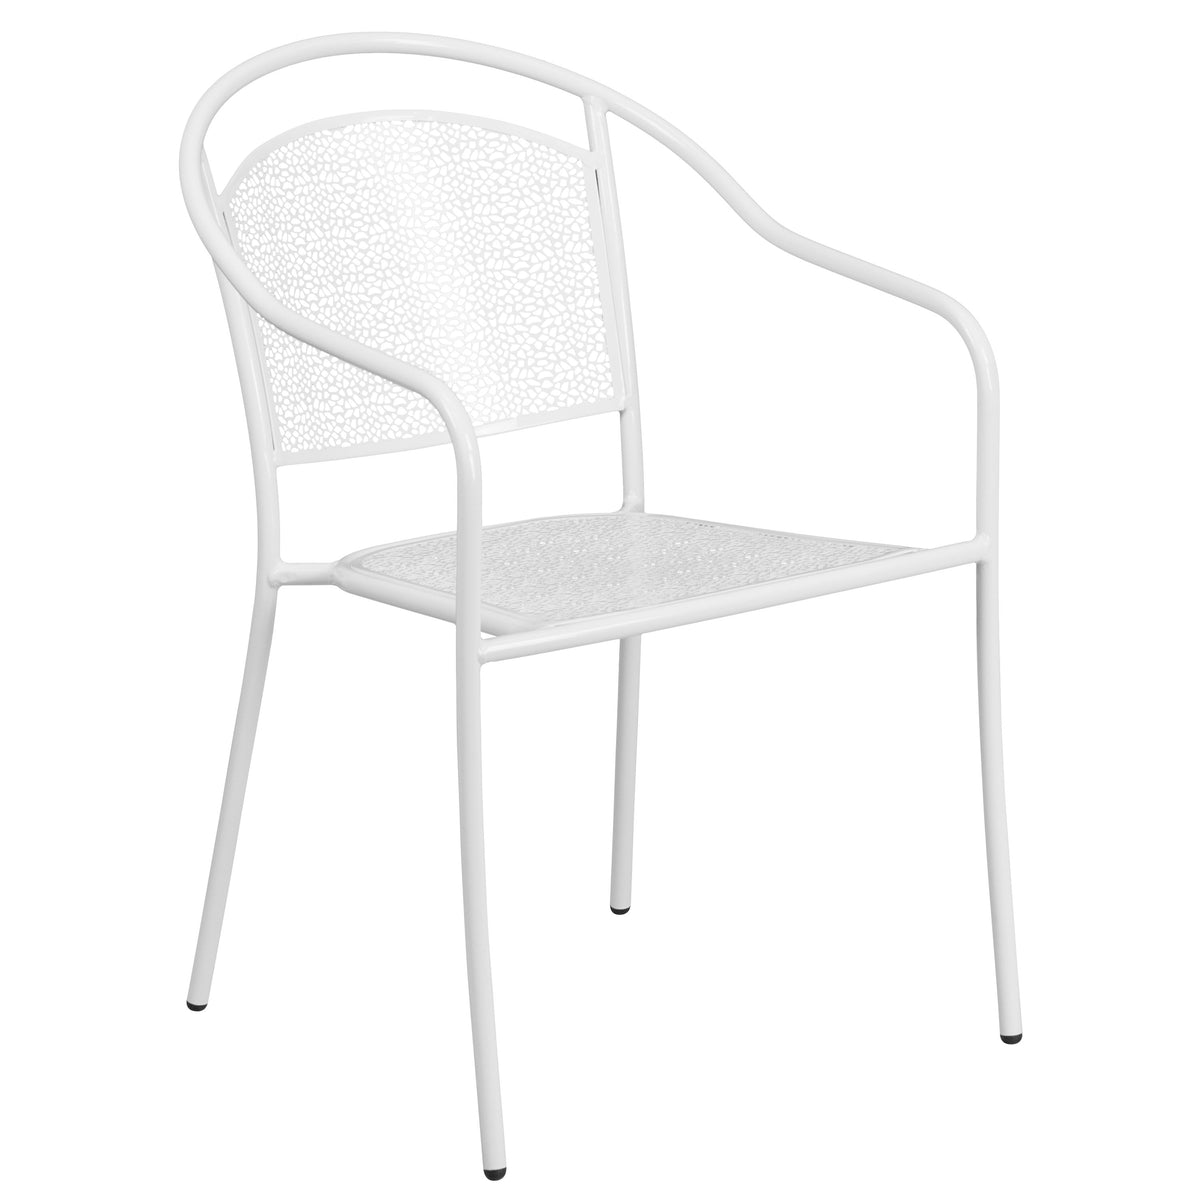 White |#| White Indoor-Outdoor Steel Patio Arm Chair with Round Back - Café Chair